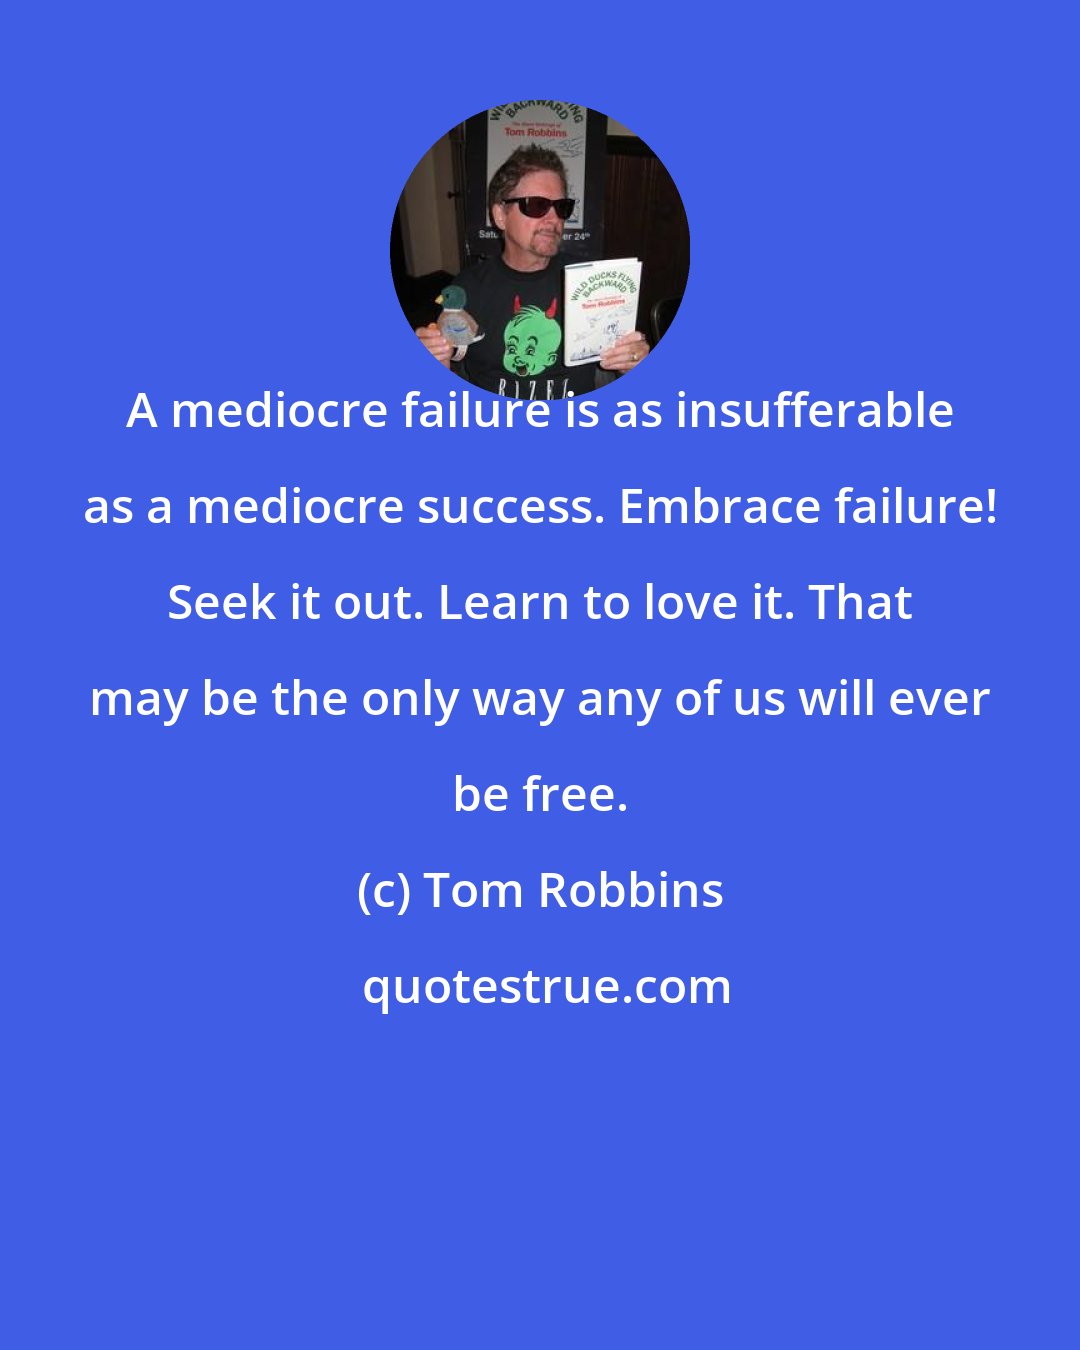 Tom Robbins: A mediocre failure is as insufferable as a mediocre success. Embrace failure! Seek it out. Learn to love it. That may be the only way any of us will ever be free.